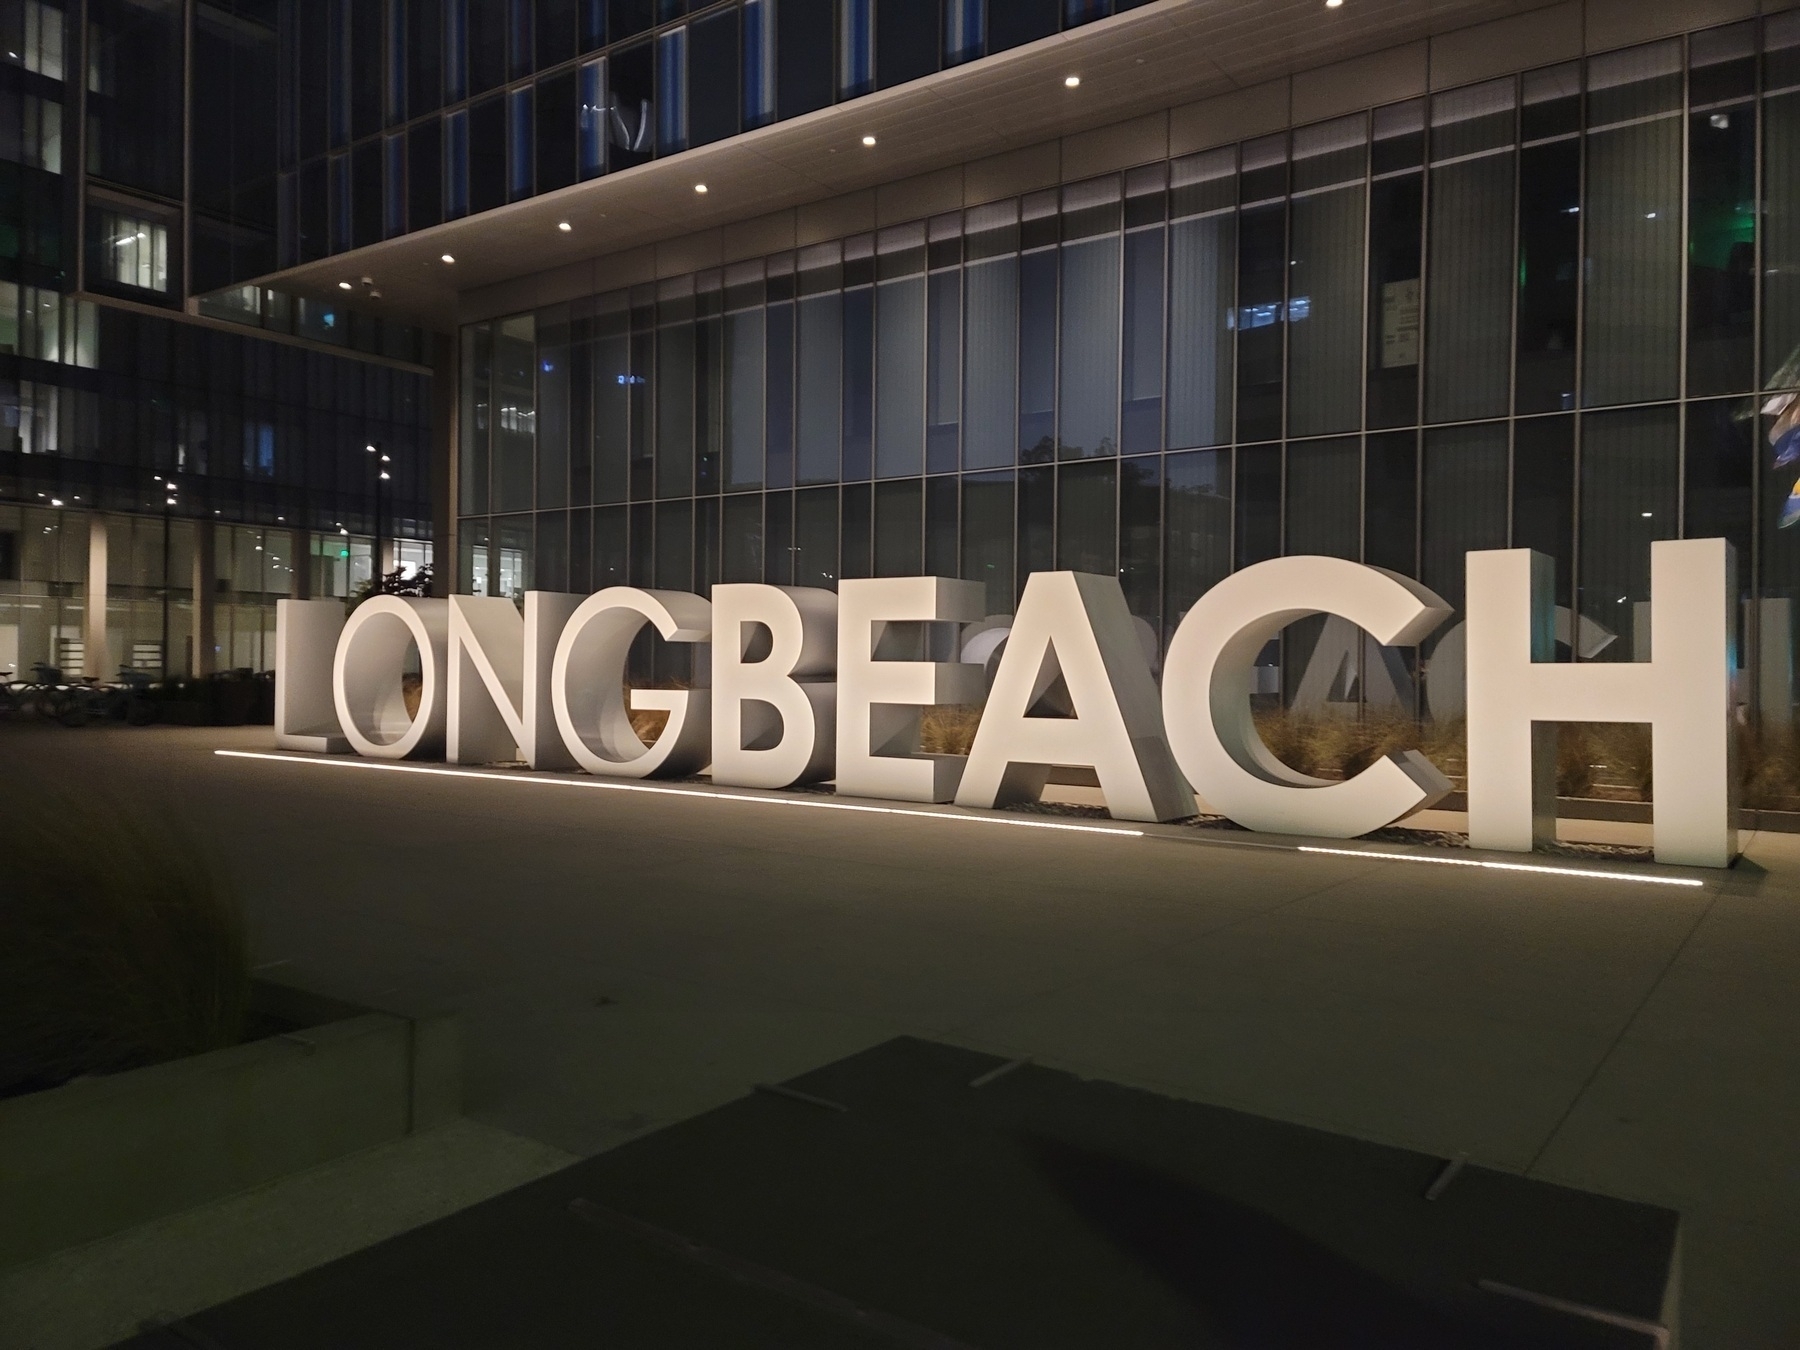 giant, white 3-D block letters spell out "LONG BEACH" outside of a glass building at night